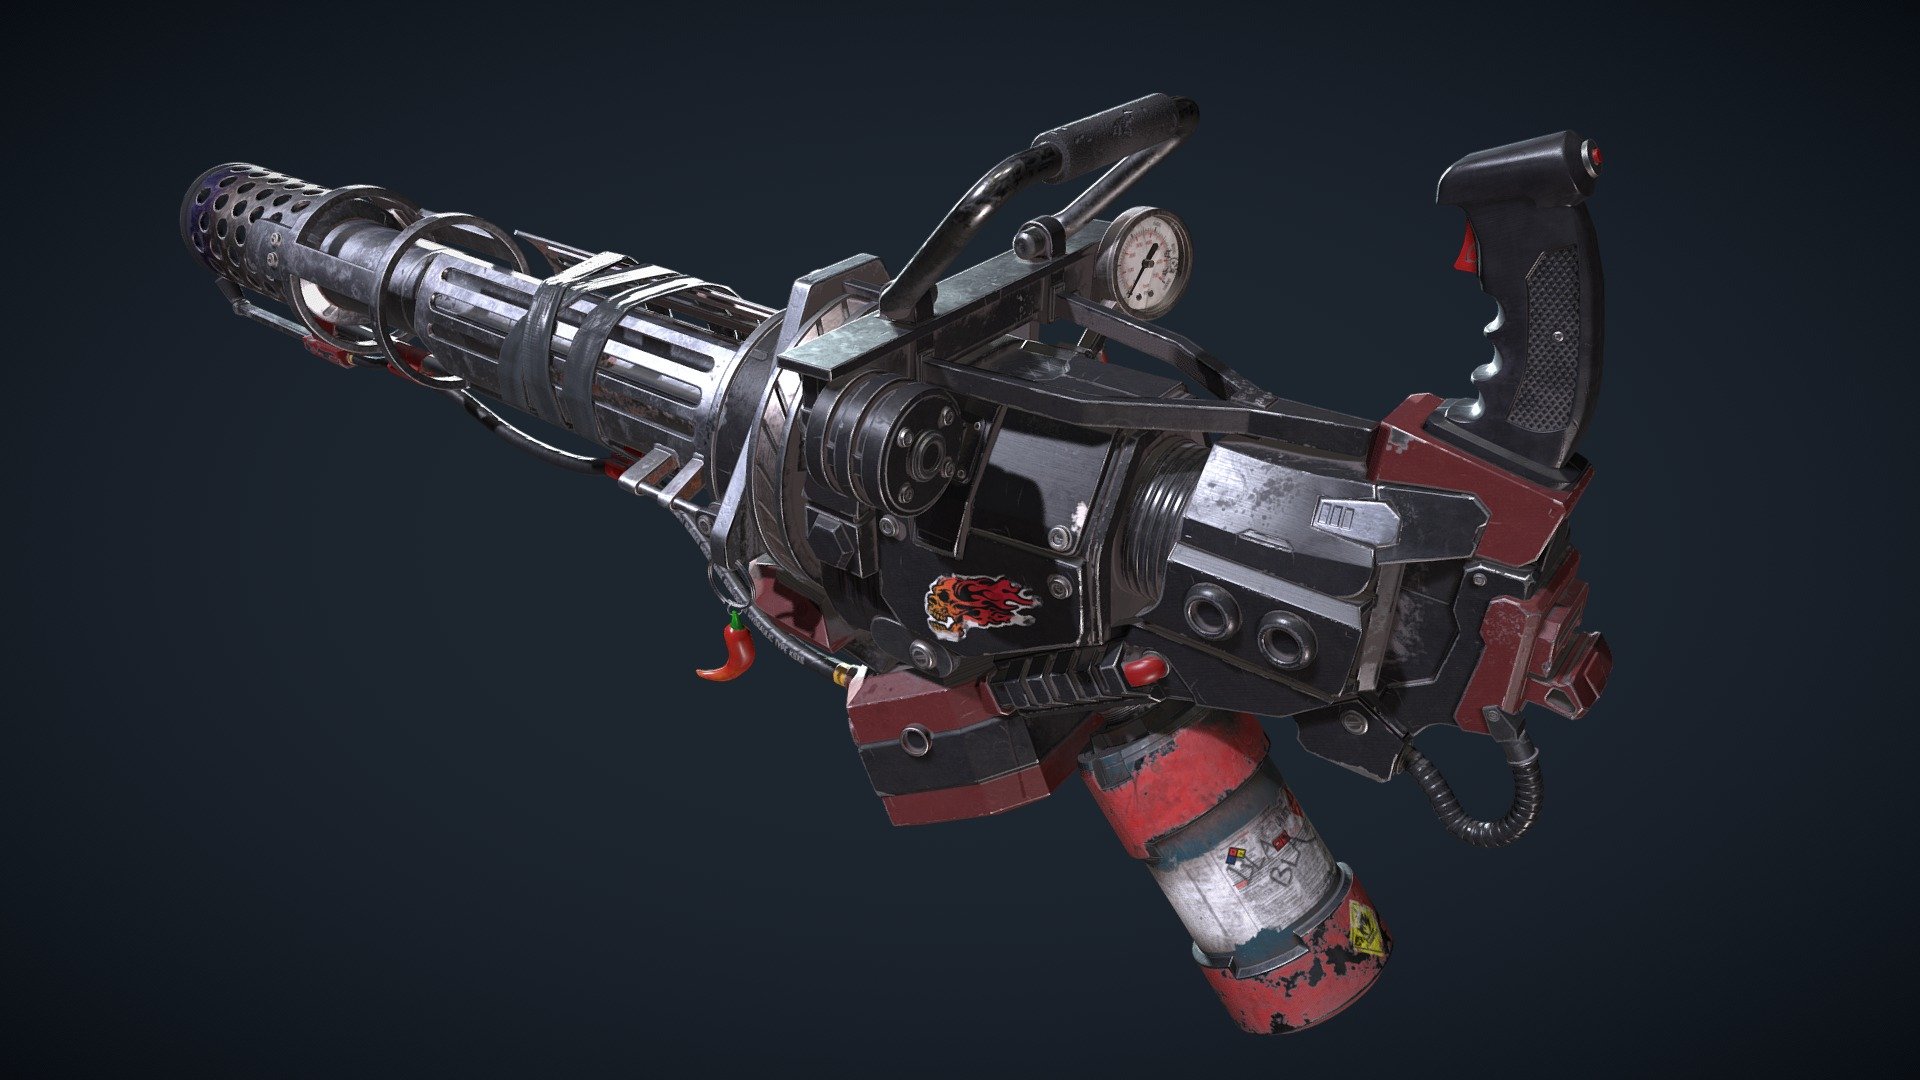 A Flamethrower combined with a Minigun!
The modle is inspired by the concept art of Saeed Jalabi

Modled in Maya
Textured in Substance Painter - Minigun meets Flamethrower - 3D model by Vivien Siemers (@vivien_siemers) 3d model